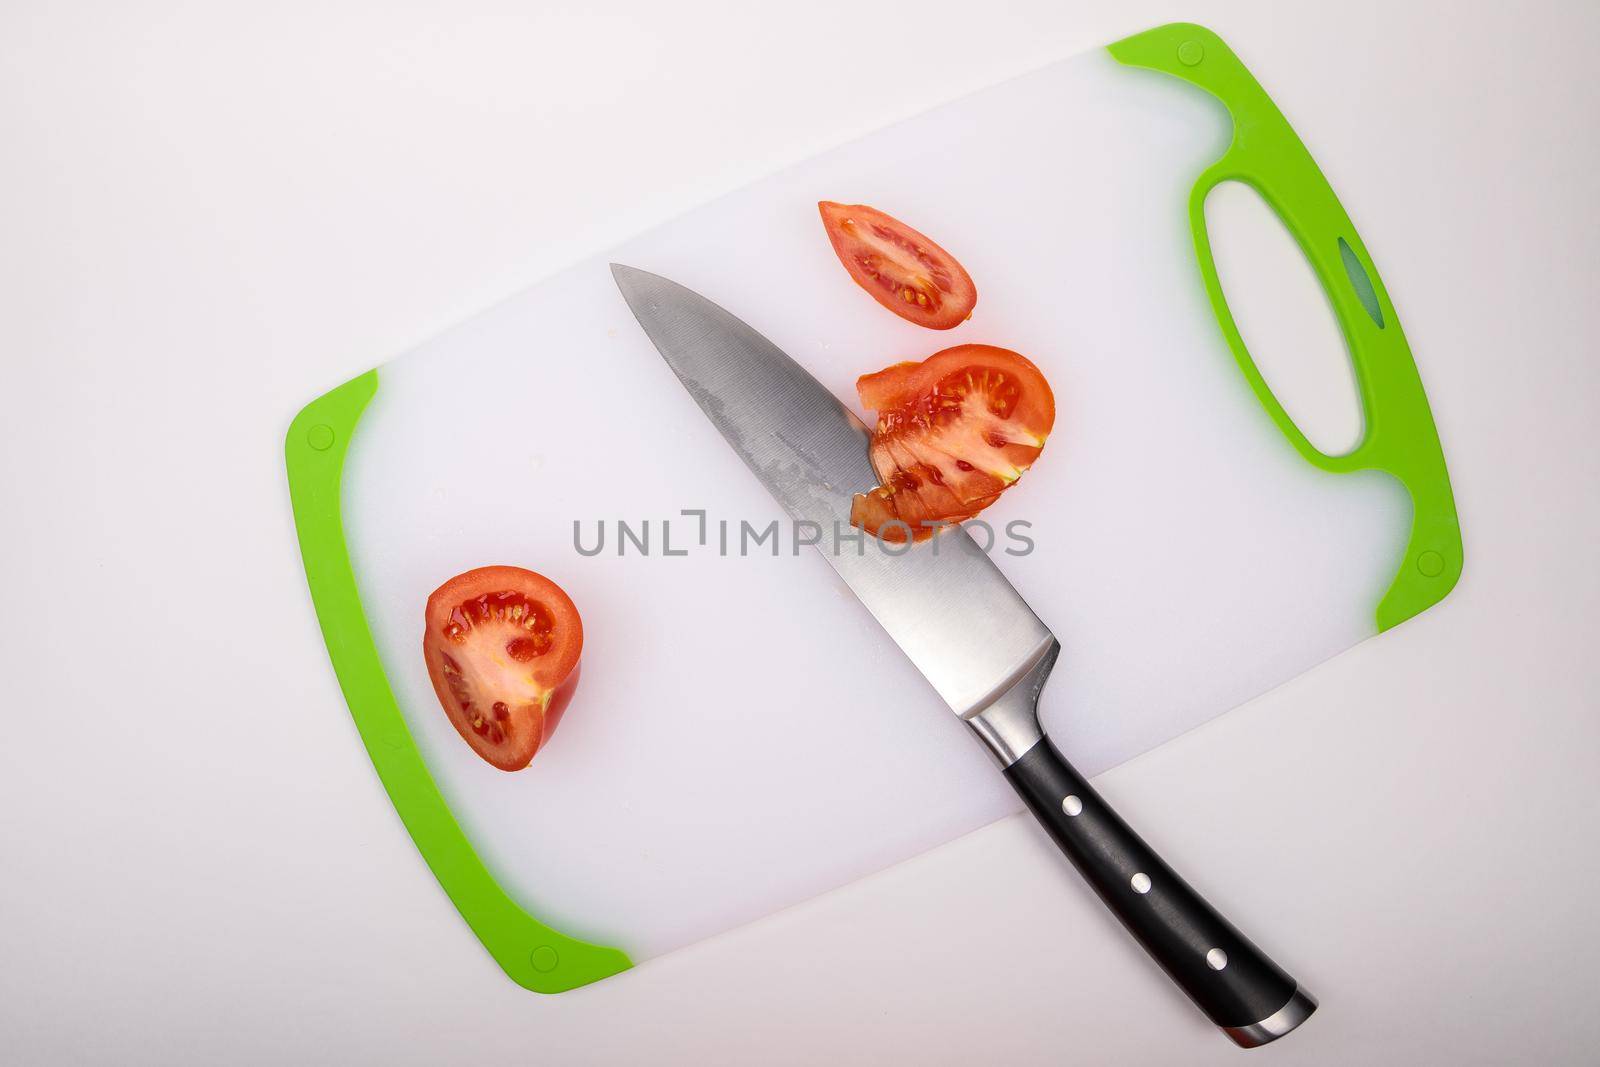 On a cutting board is a fresh red cut tomato and a large chef's knife. On an isolated white background.